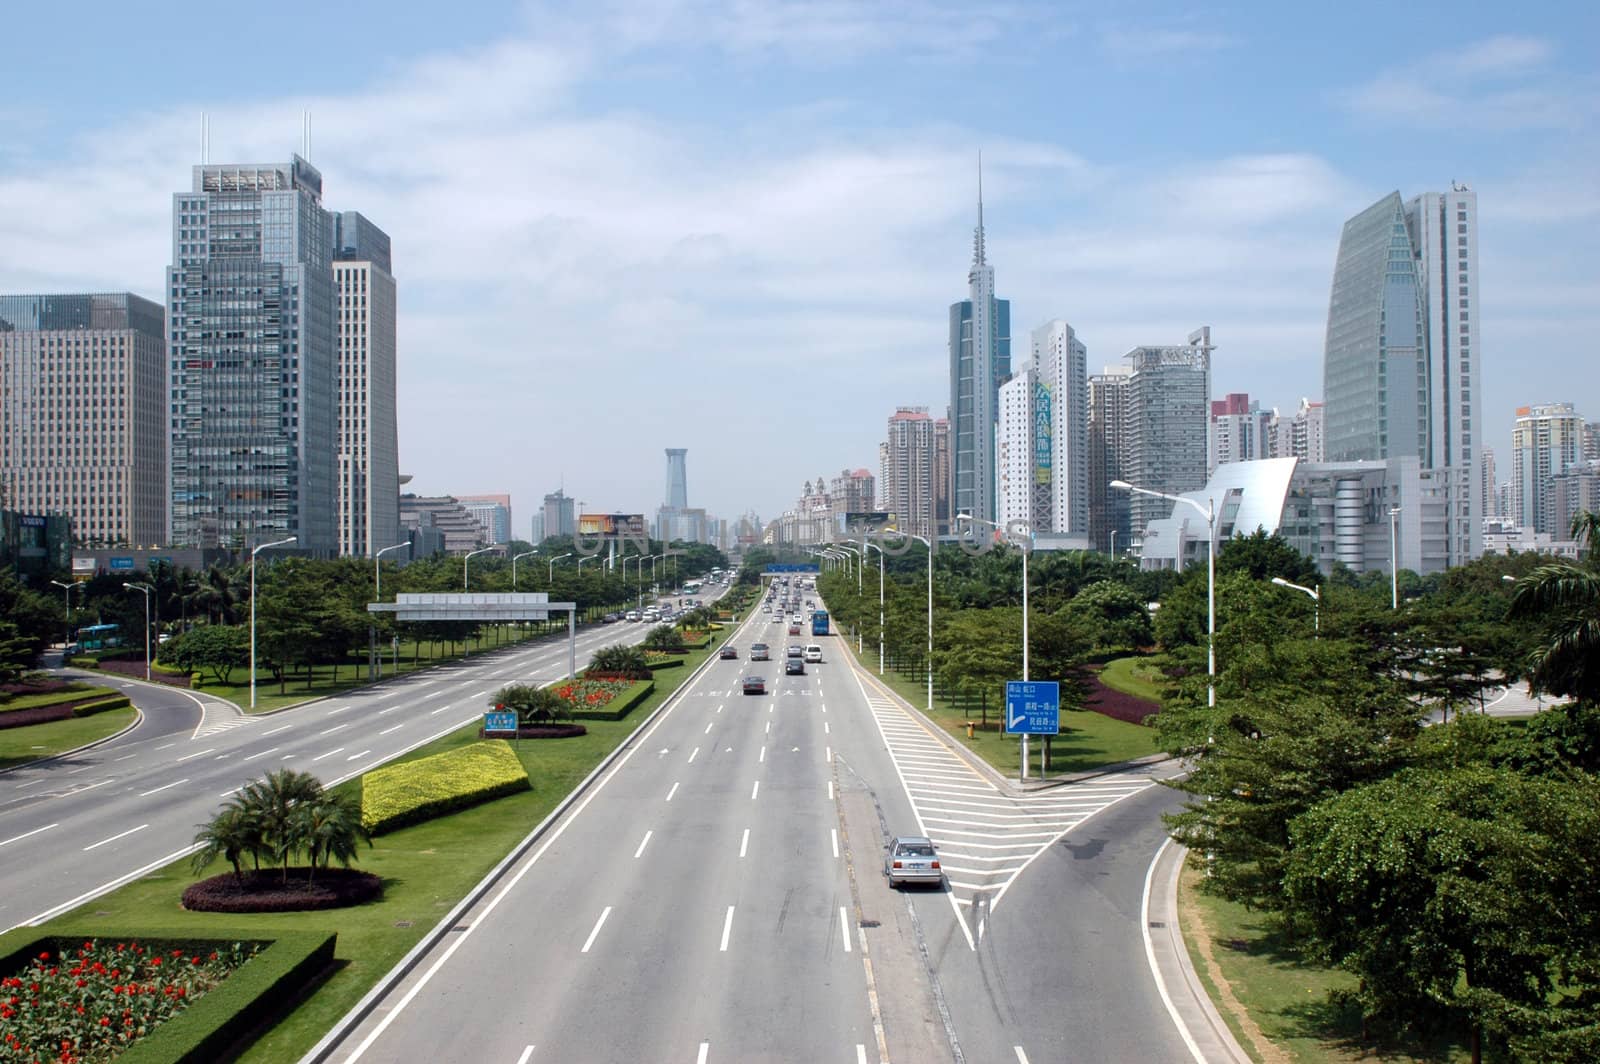 China, Guangdong province, main avenue Shennan Road in Shenzhen city with modern skyscrapers, office buildings.